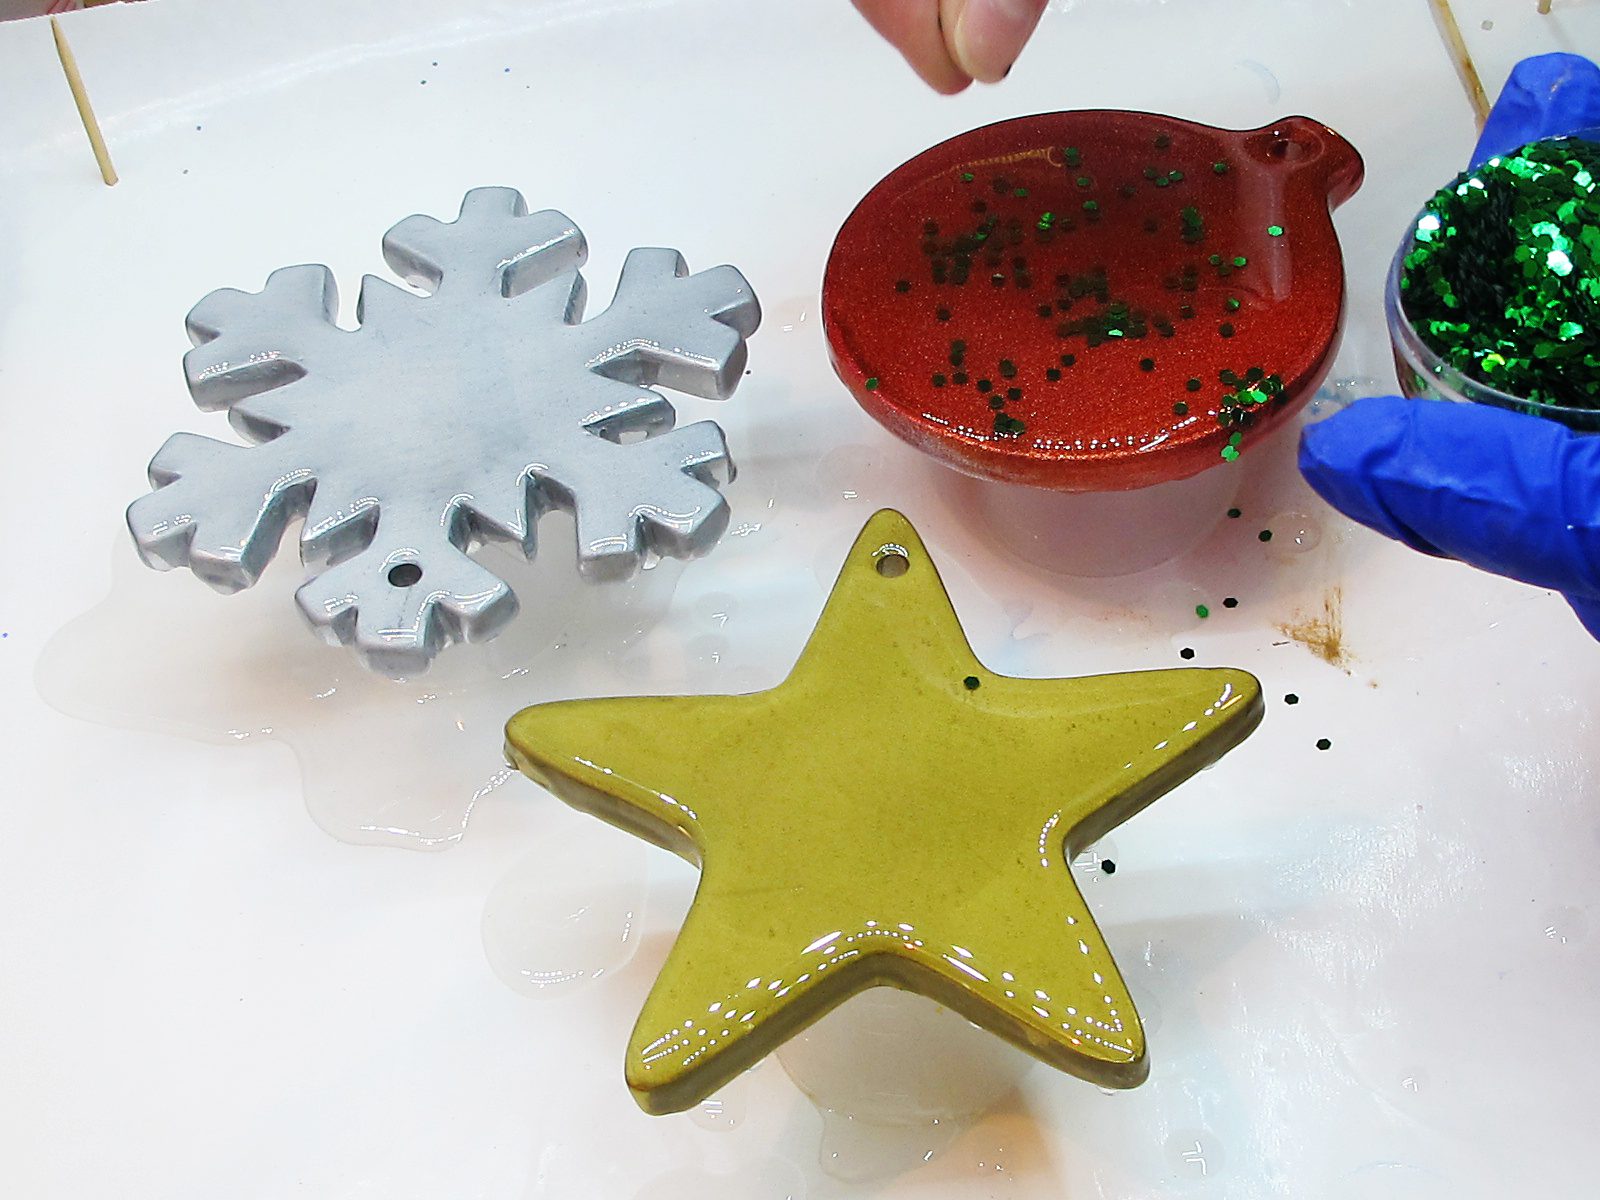 Sprinkling green glitter on a red ornament with resin.